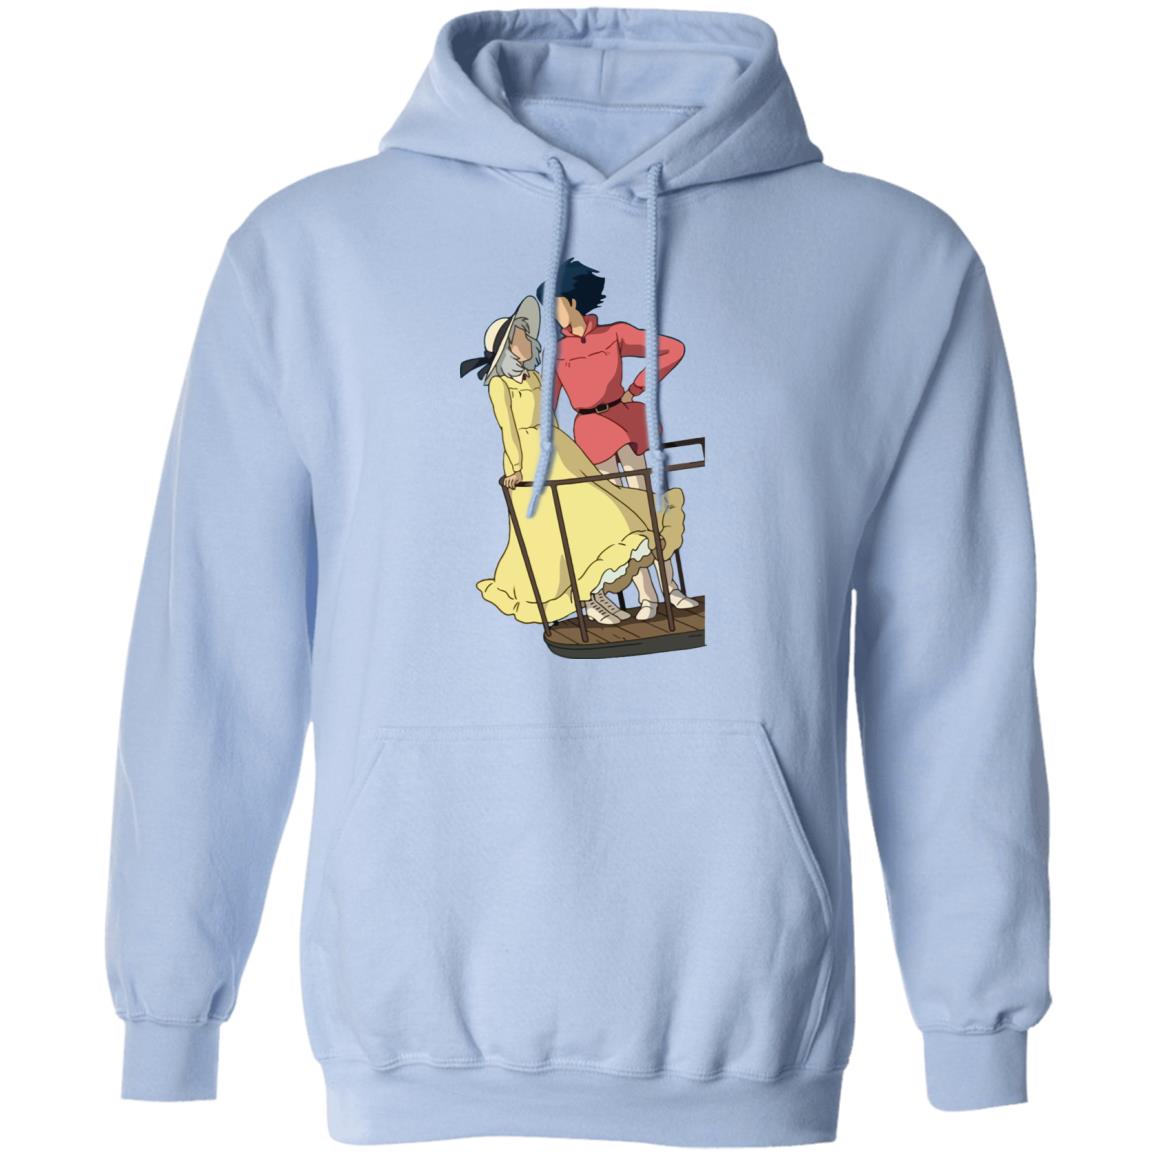 Howl’s Moving Castle – Sophie and Howl Gazing at Each other Hoodie